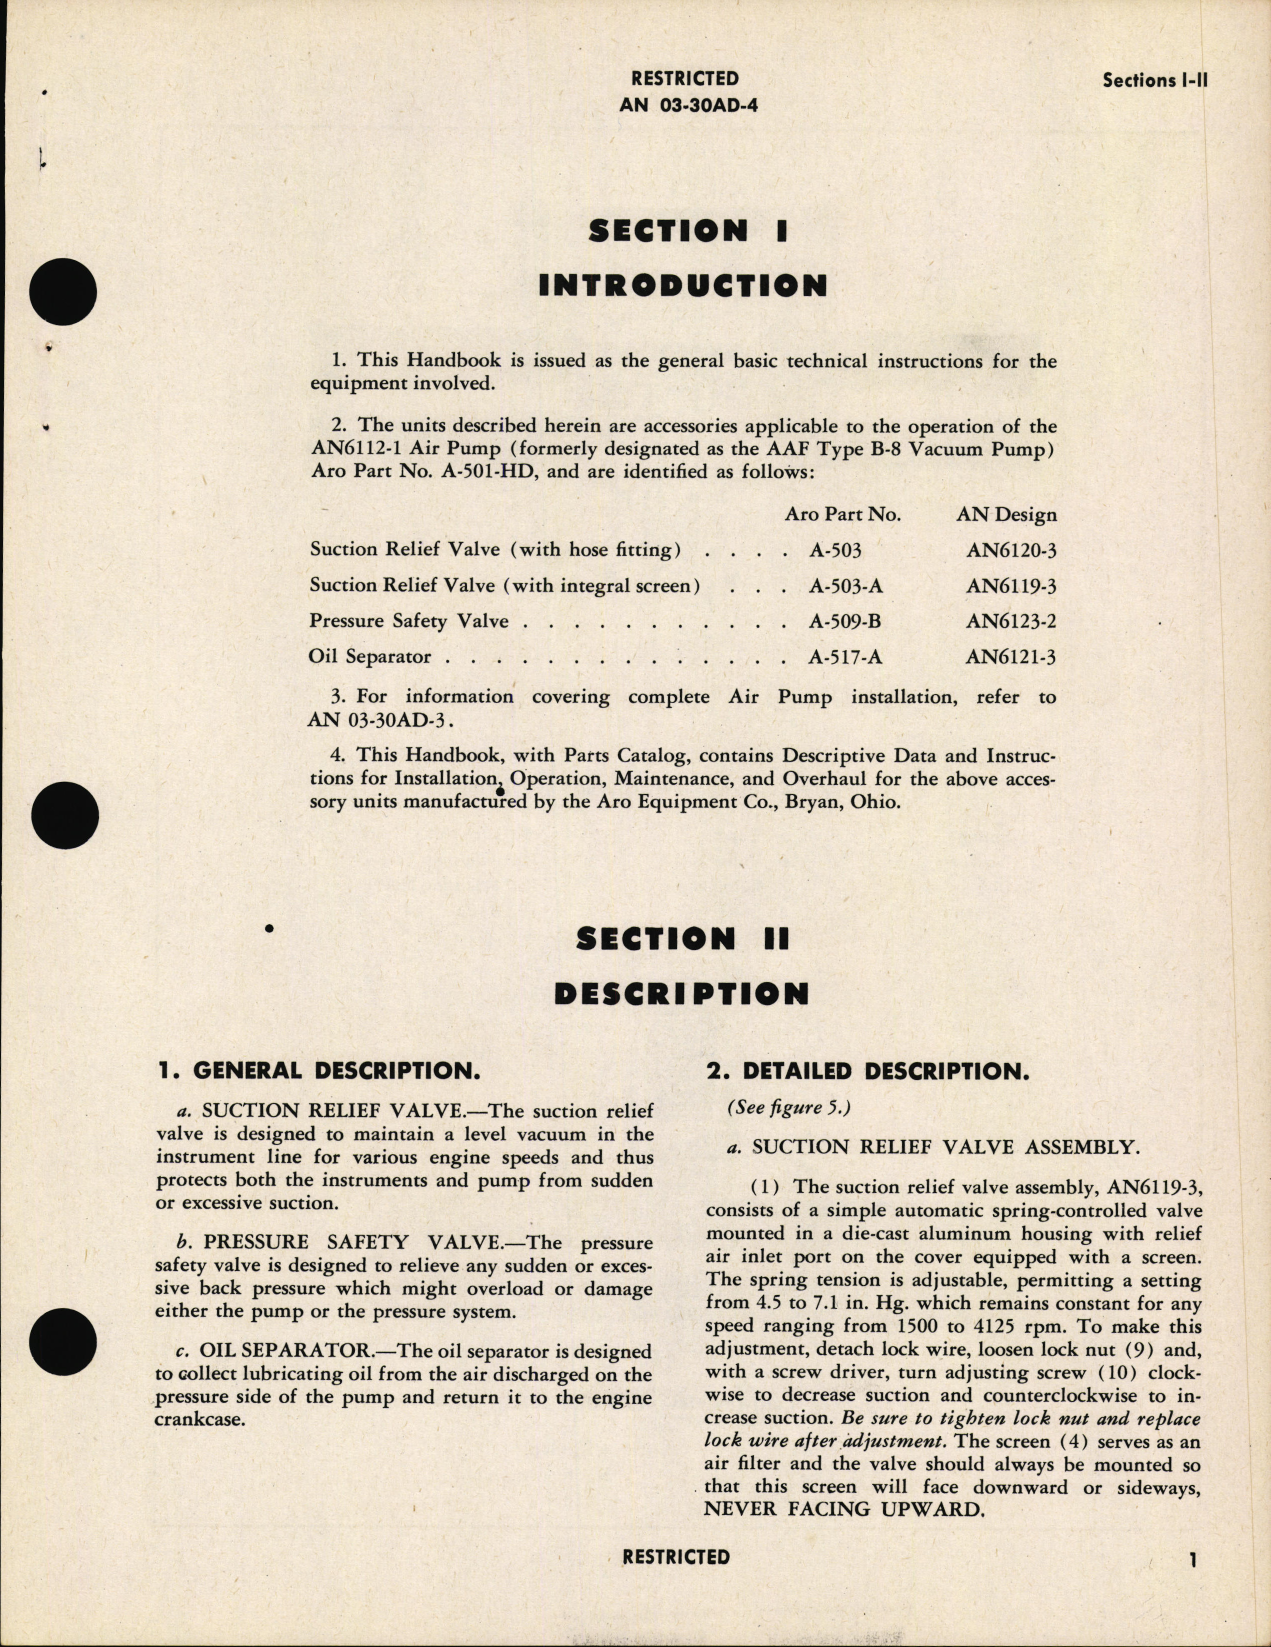 Sample page 5 from AirCorps Library document: Handbook of Instructions with Parts Catalog for Relief Valves, Safety Valve, and Oil Separator